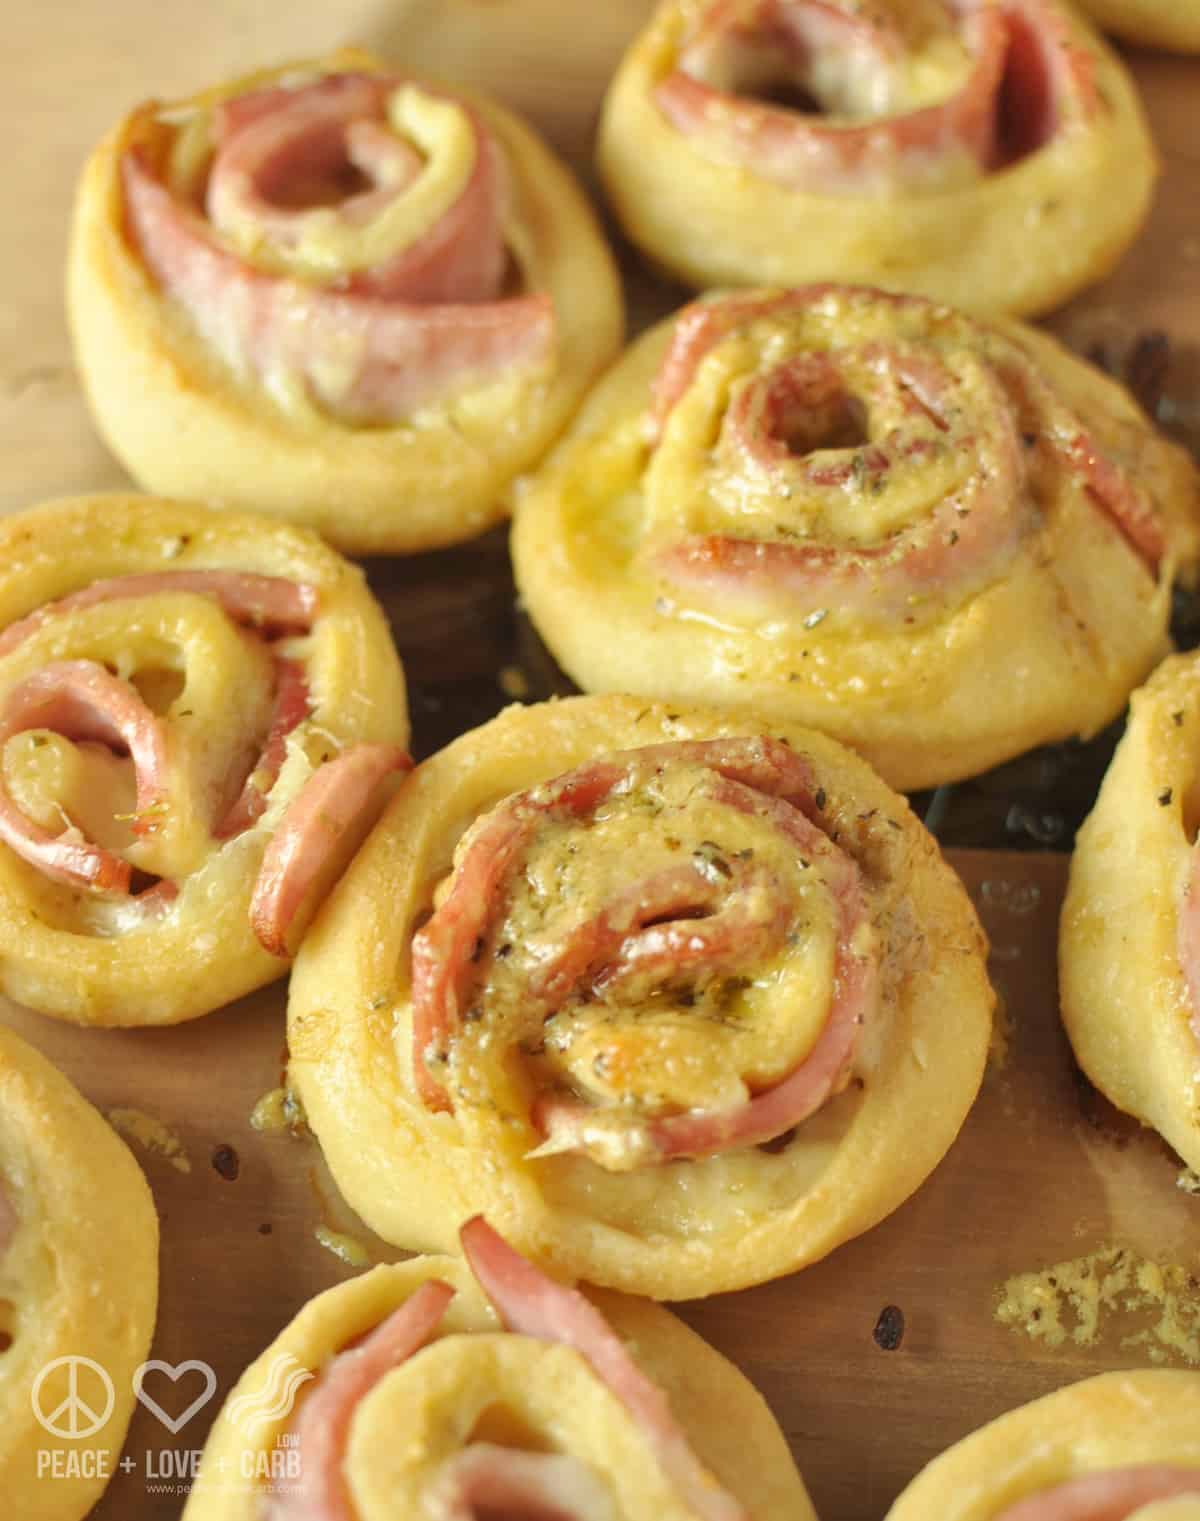 Individual baked hot ham and cheese roll ups, coated with honey dijon butter glaze and sprinkled with herbs, sitting on a wooden cutting board.